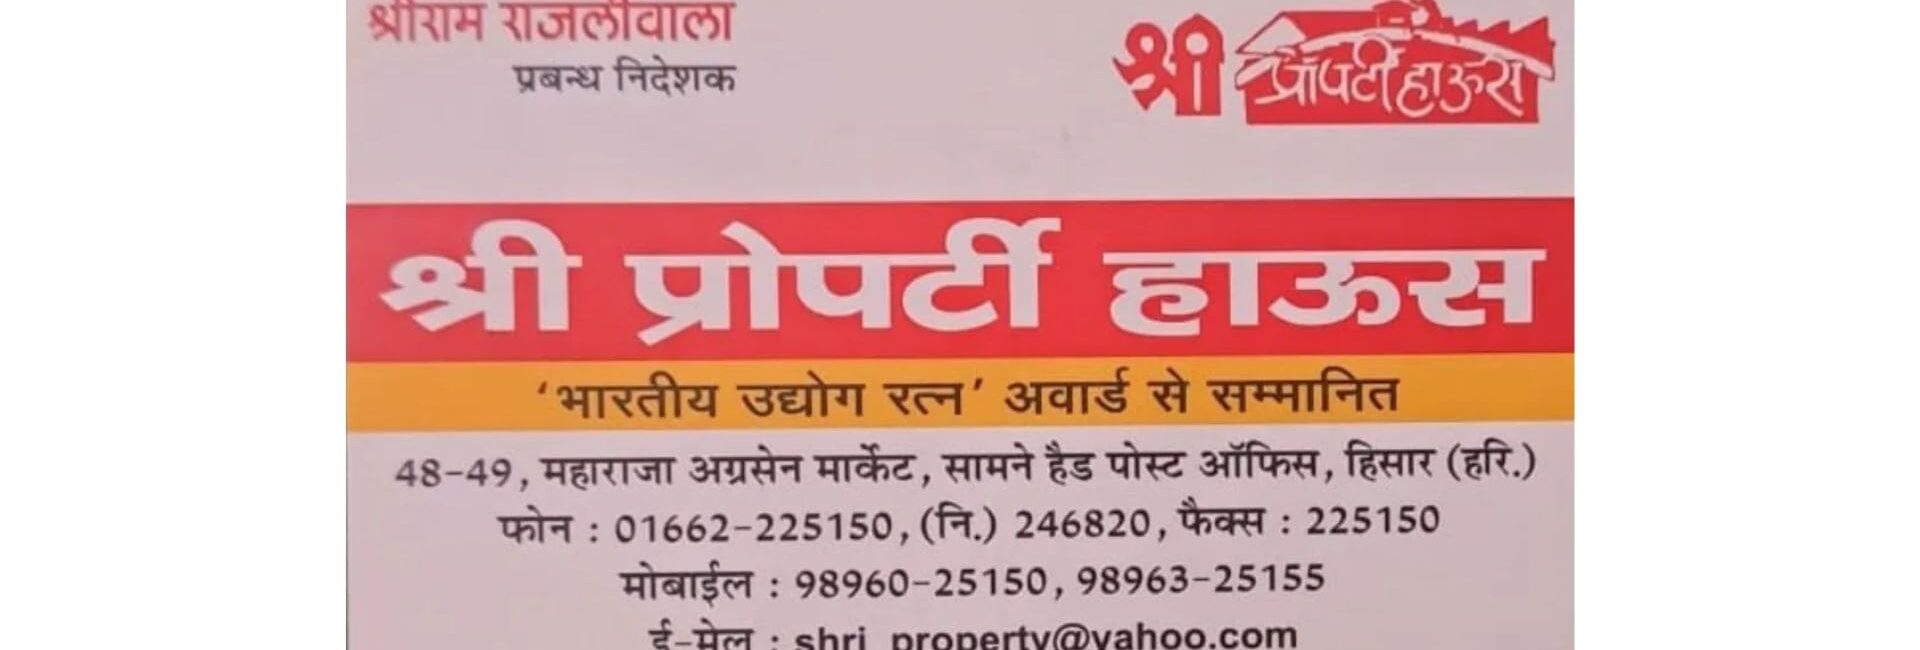 Shri Property House - Real estate agent in Hisar